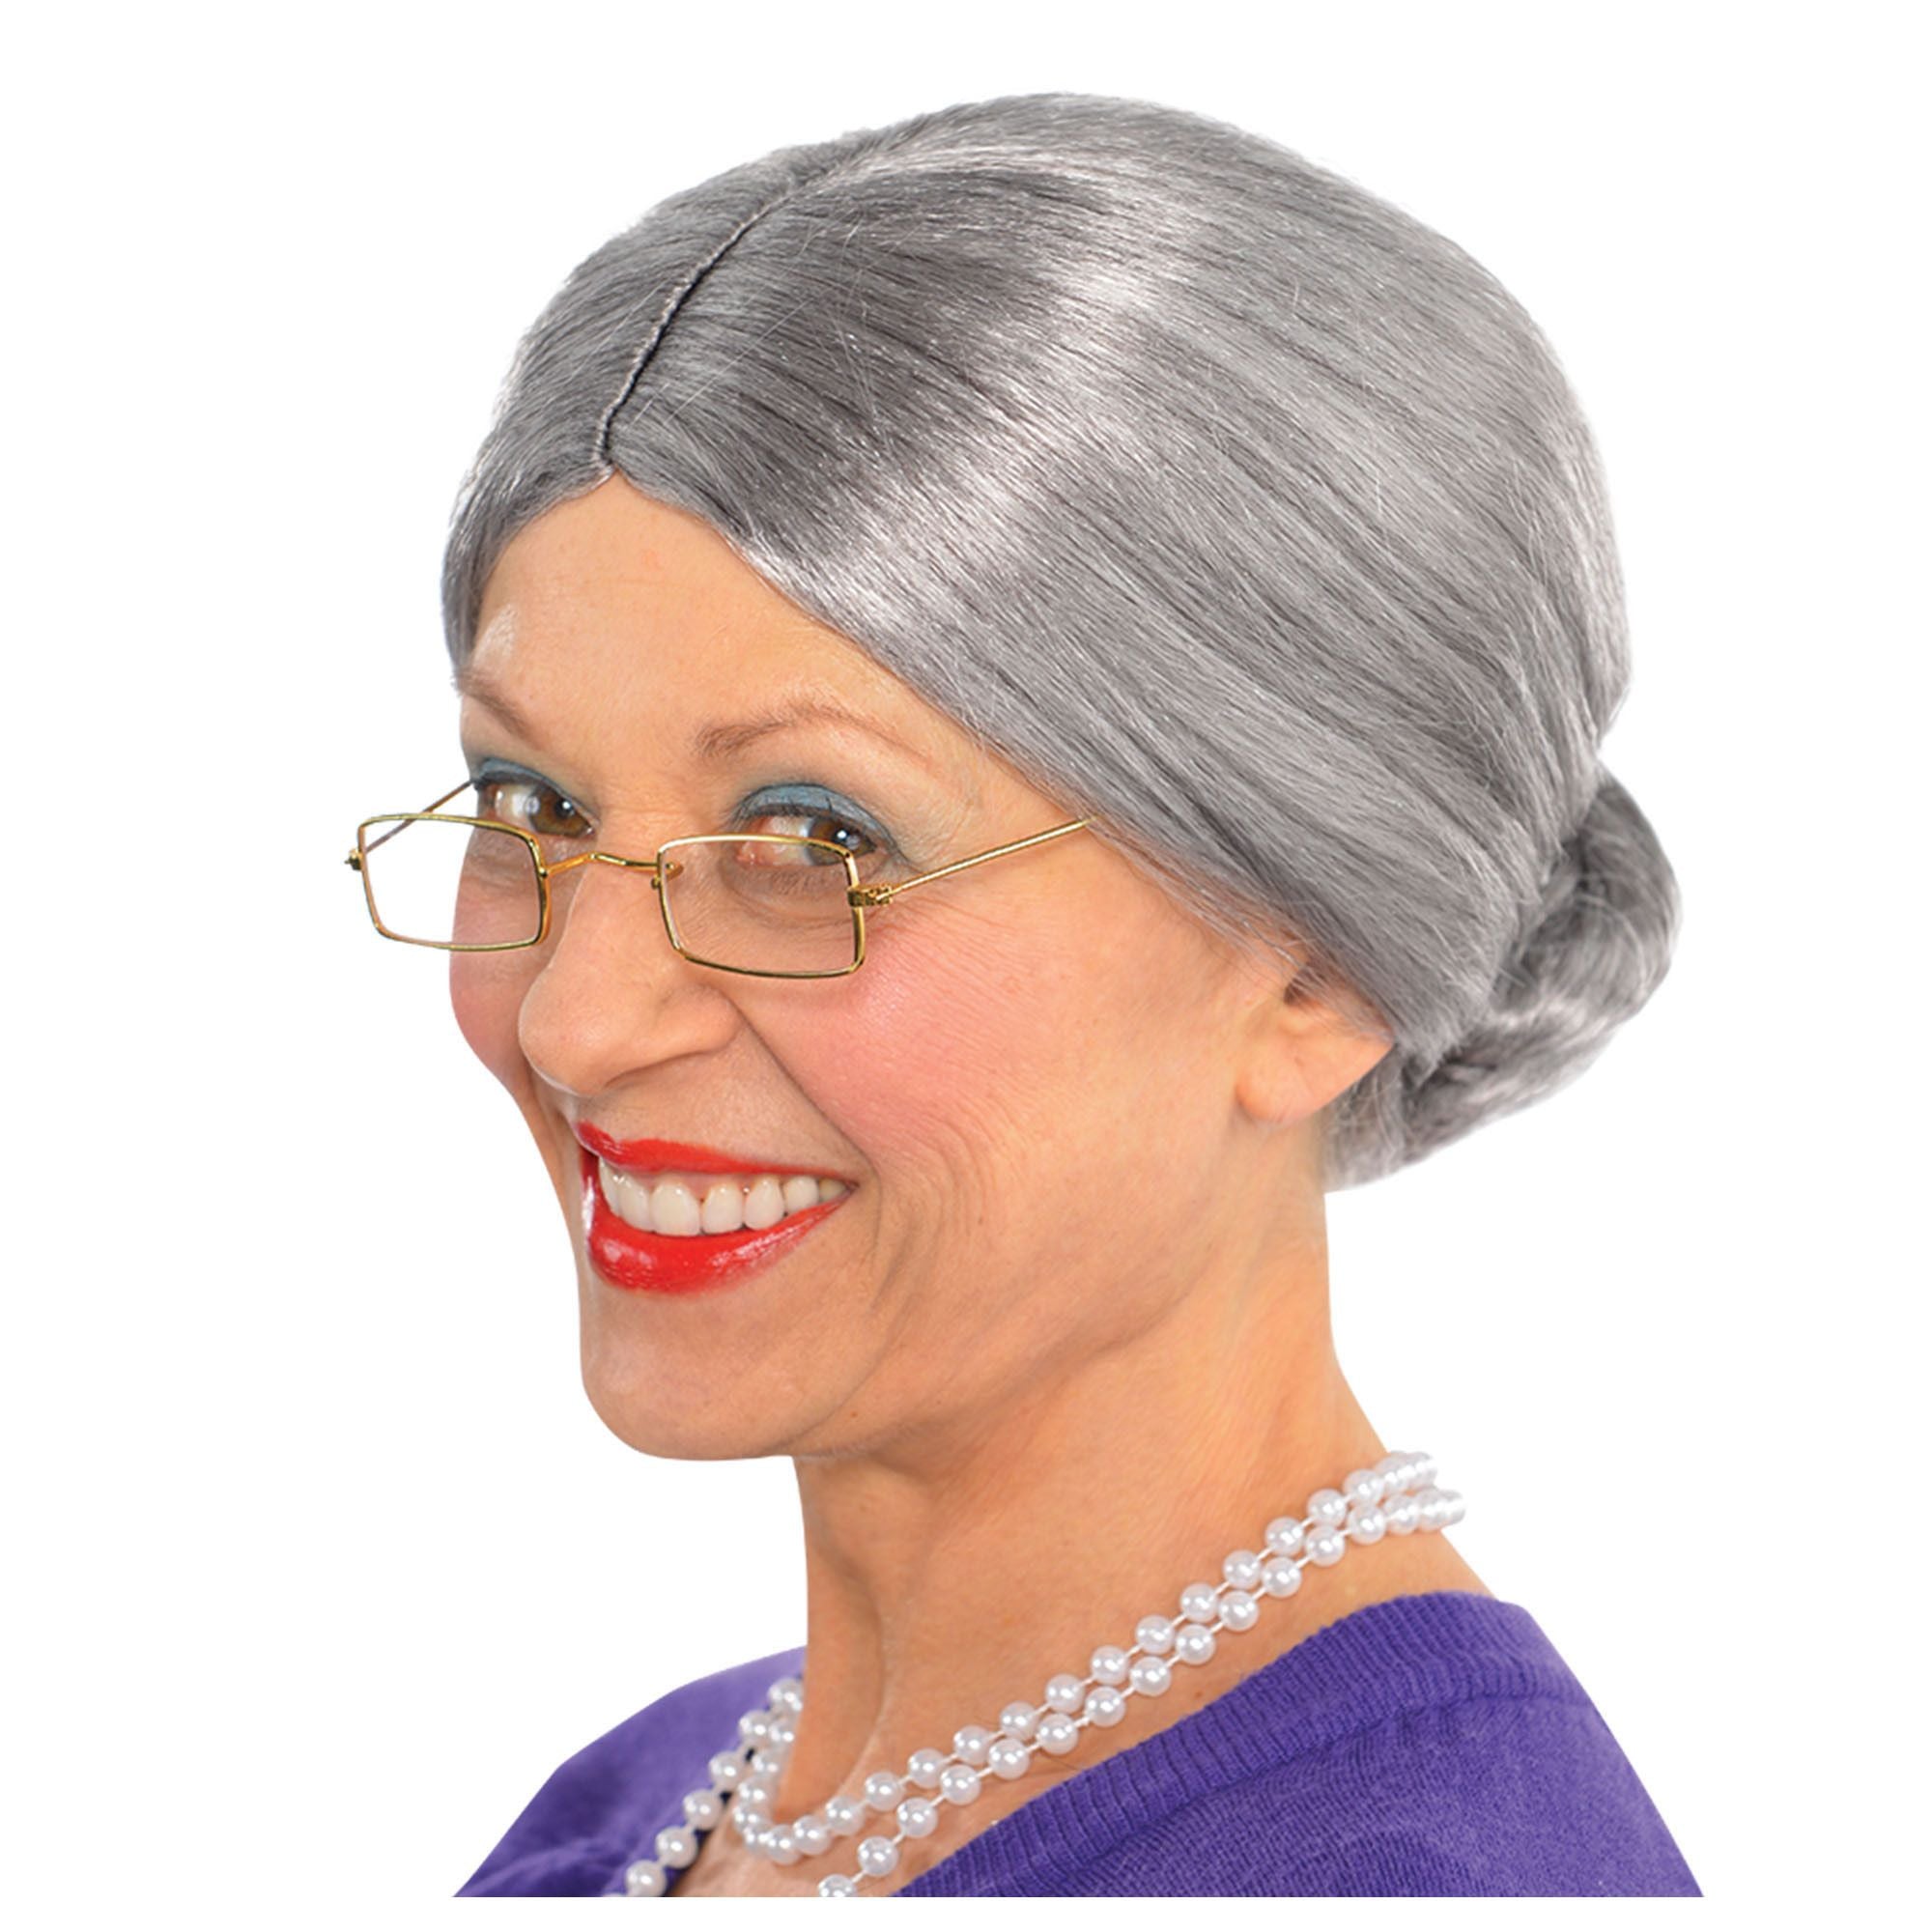 Amscan COSTUMES: WIGS Old Lady Wig